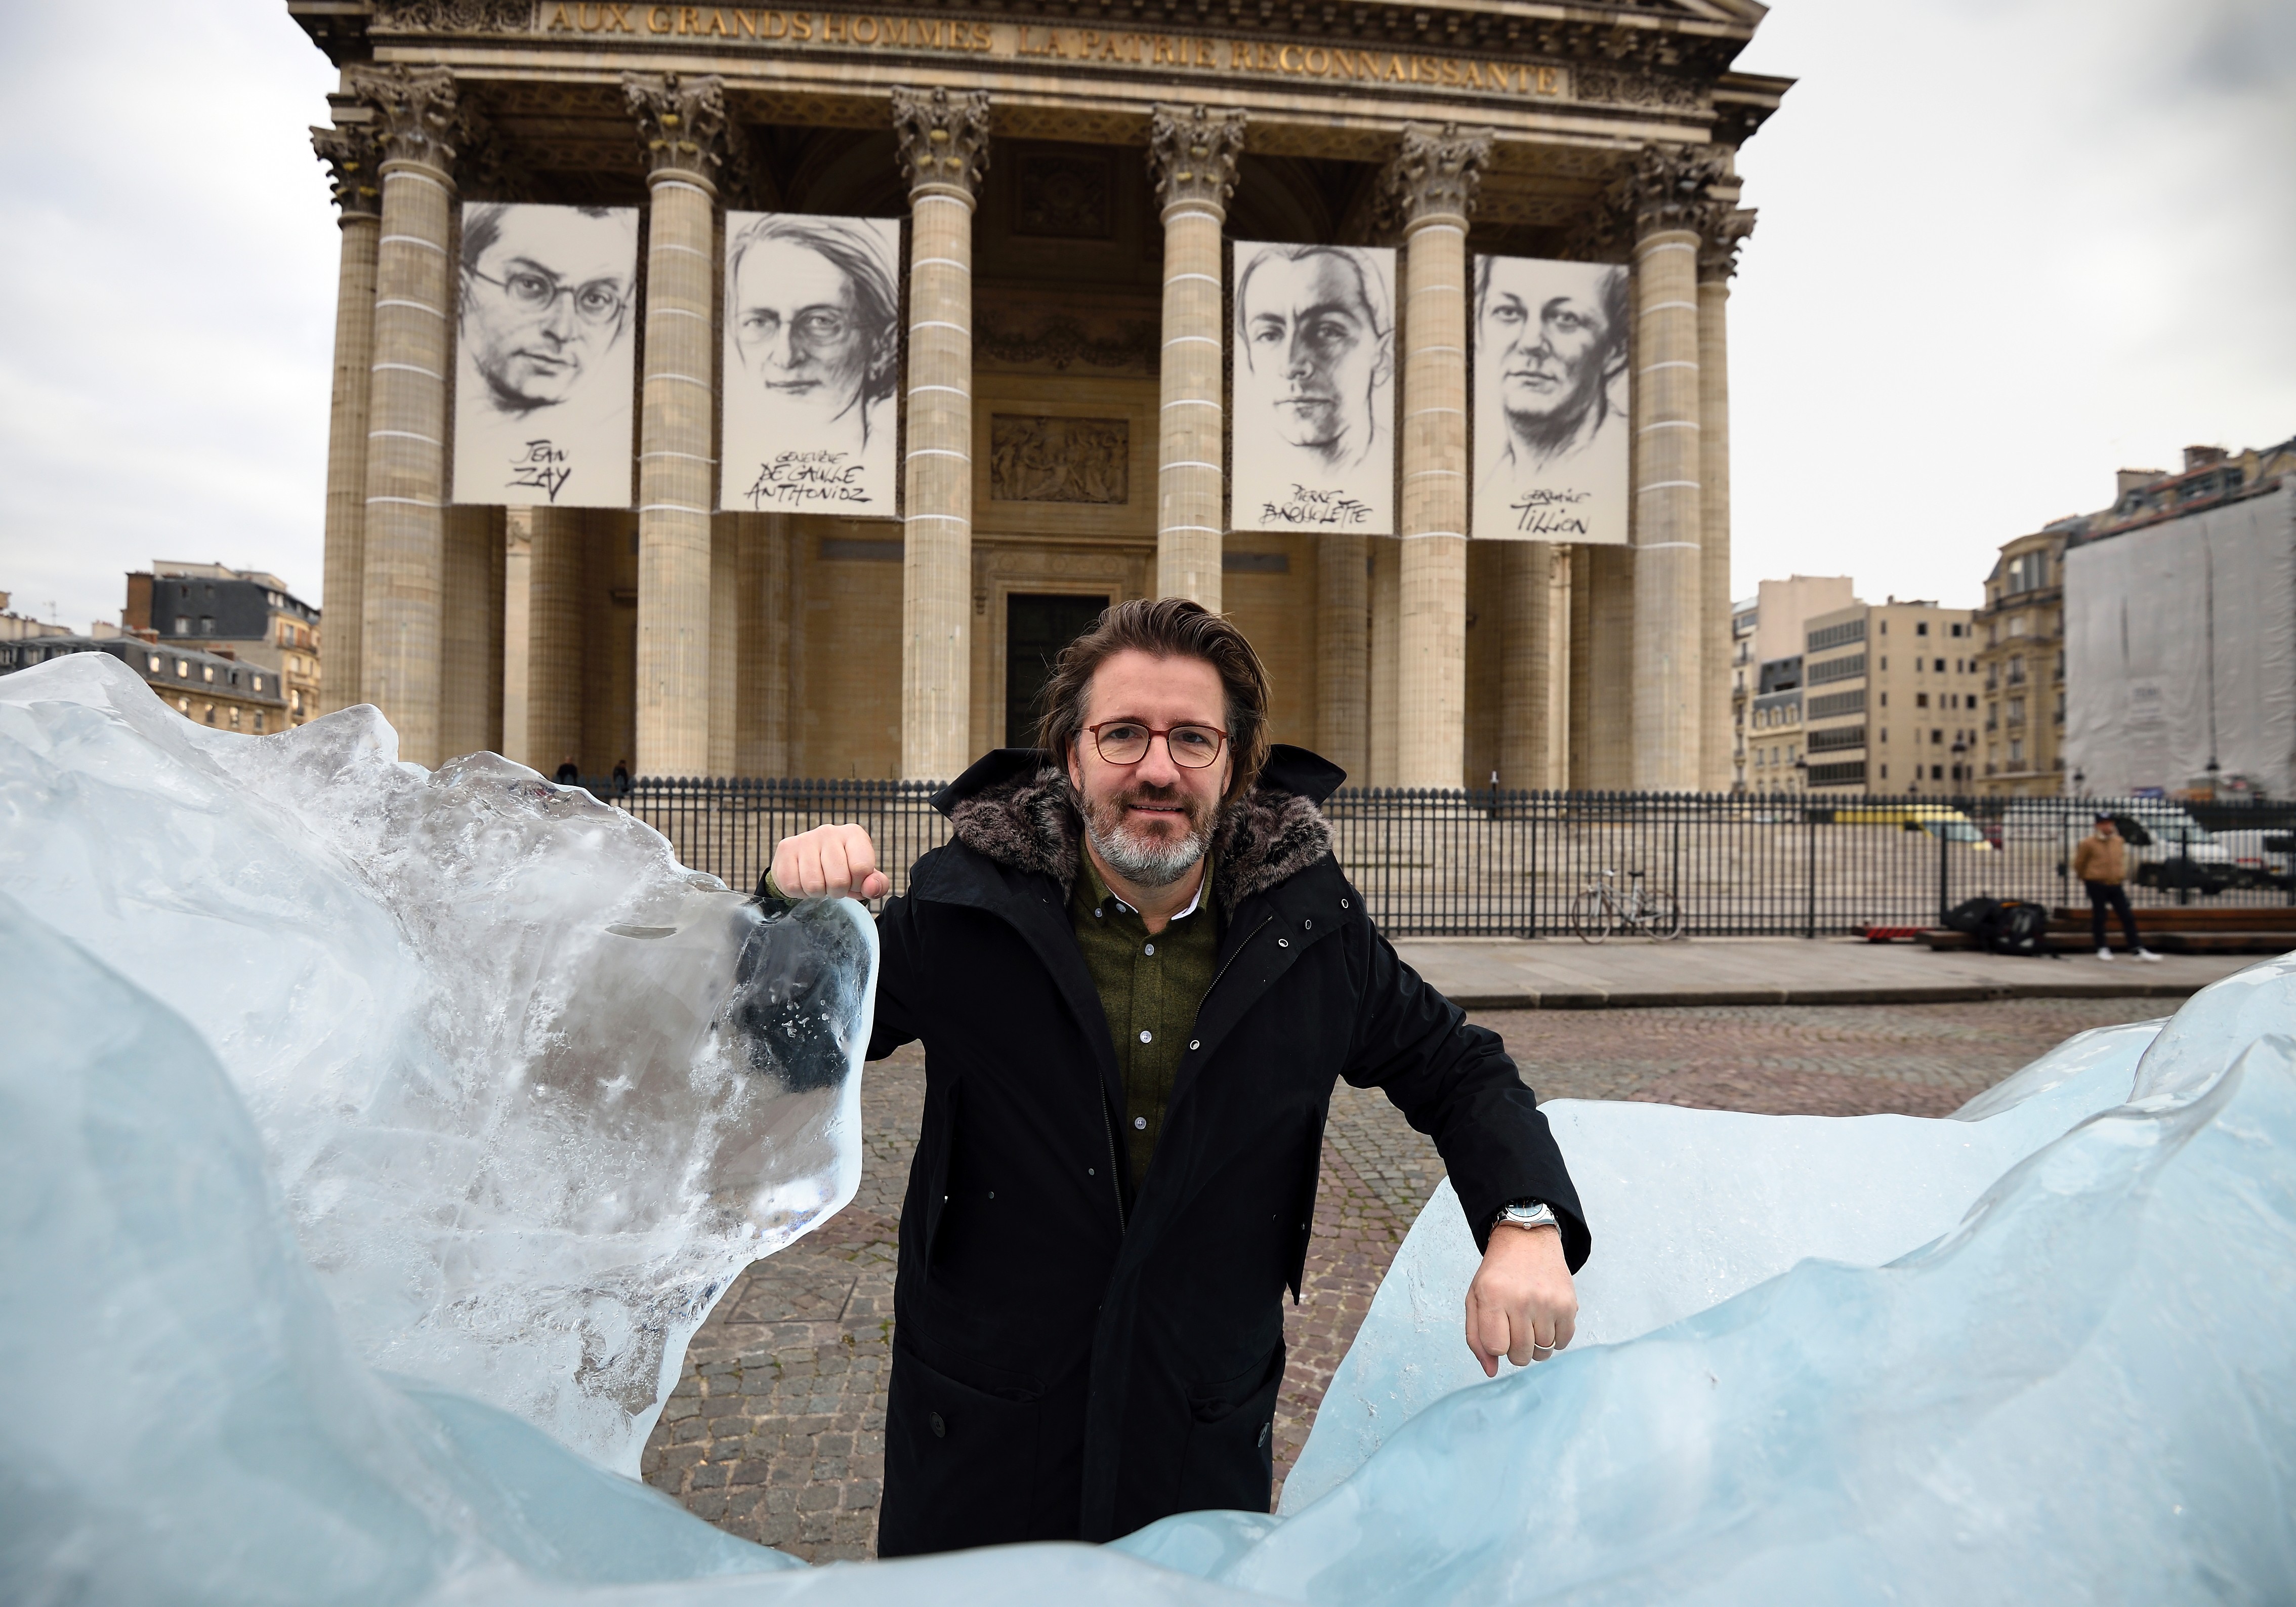 Danish-Icelandic artist Olafur Eliasson poses beside his art installation "Ice Watch" made with parts of Greenland's ice cap, on display in front of the Pantheon in Paris on December 3, 2015